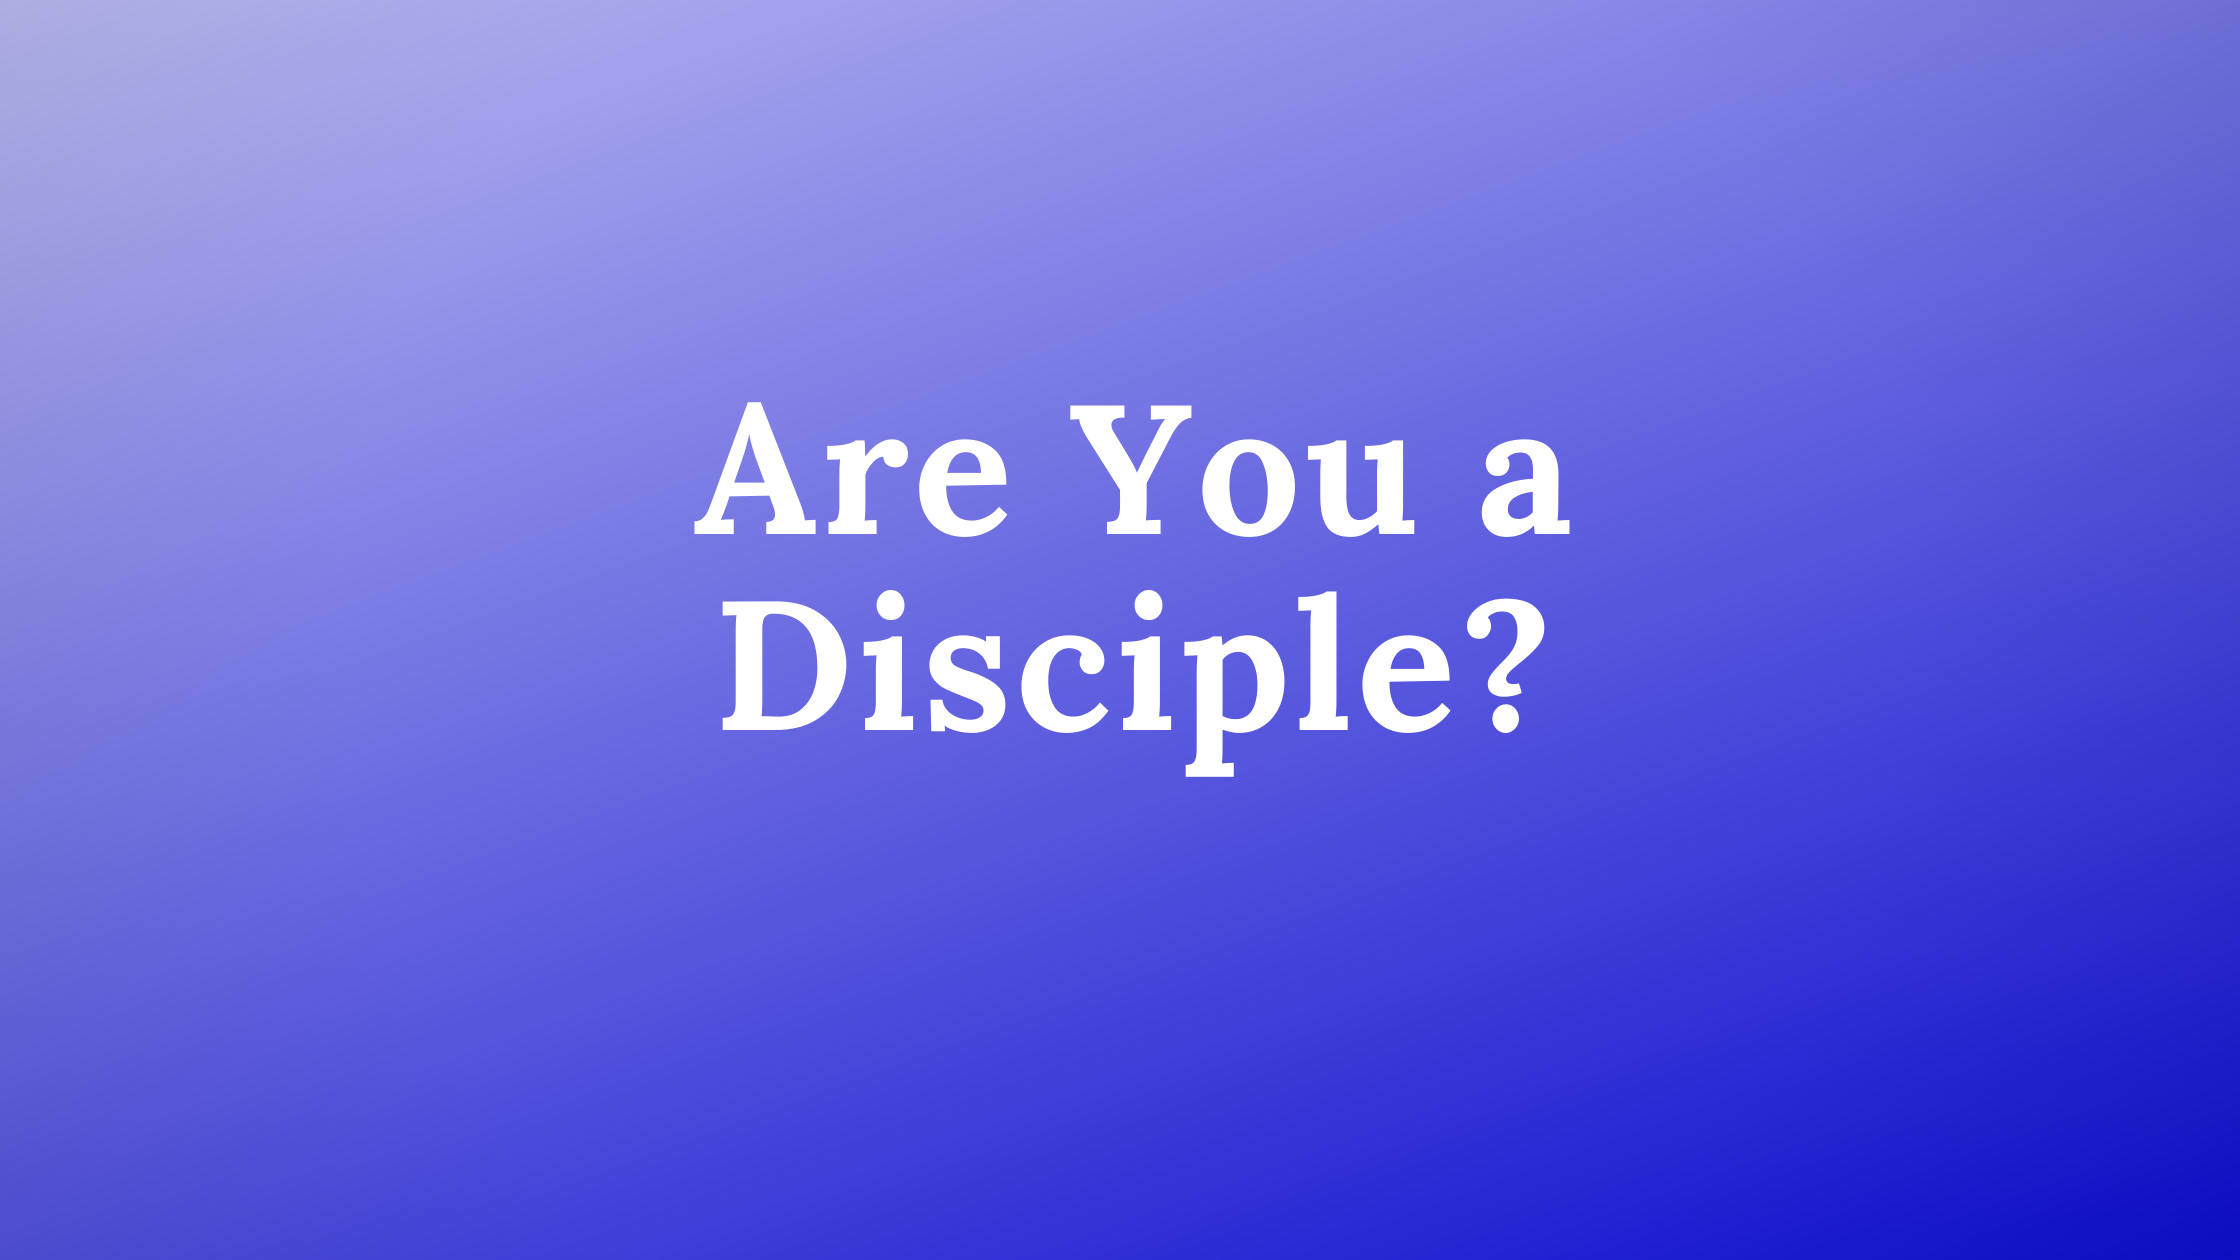 Are you a disciple?